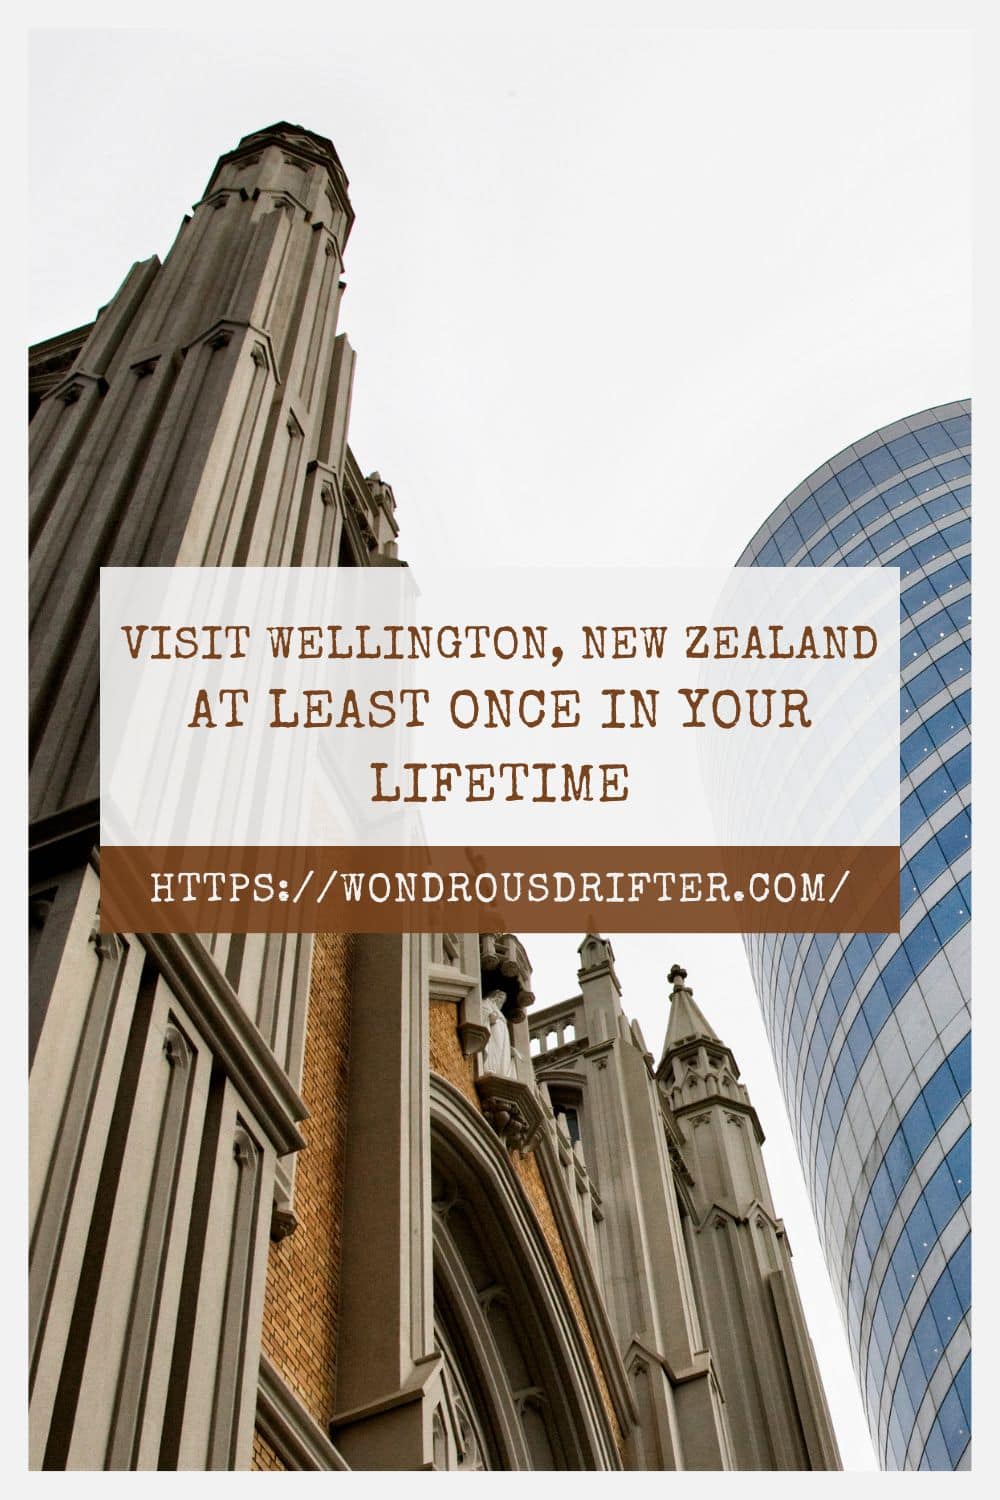 Visit Wellington New Zealand at least once in your lifetime